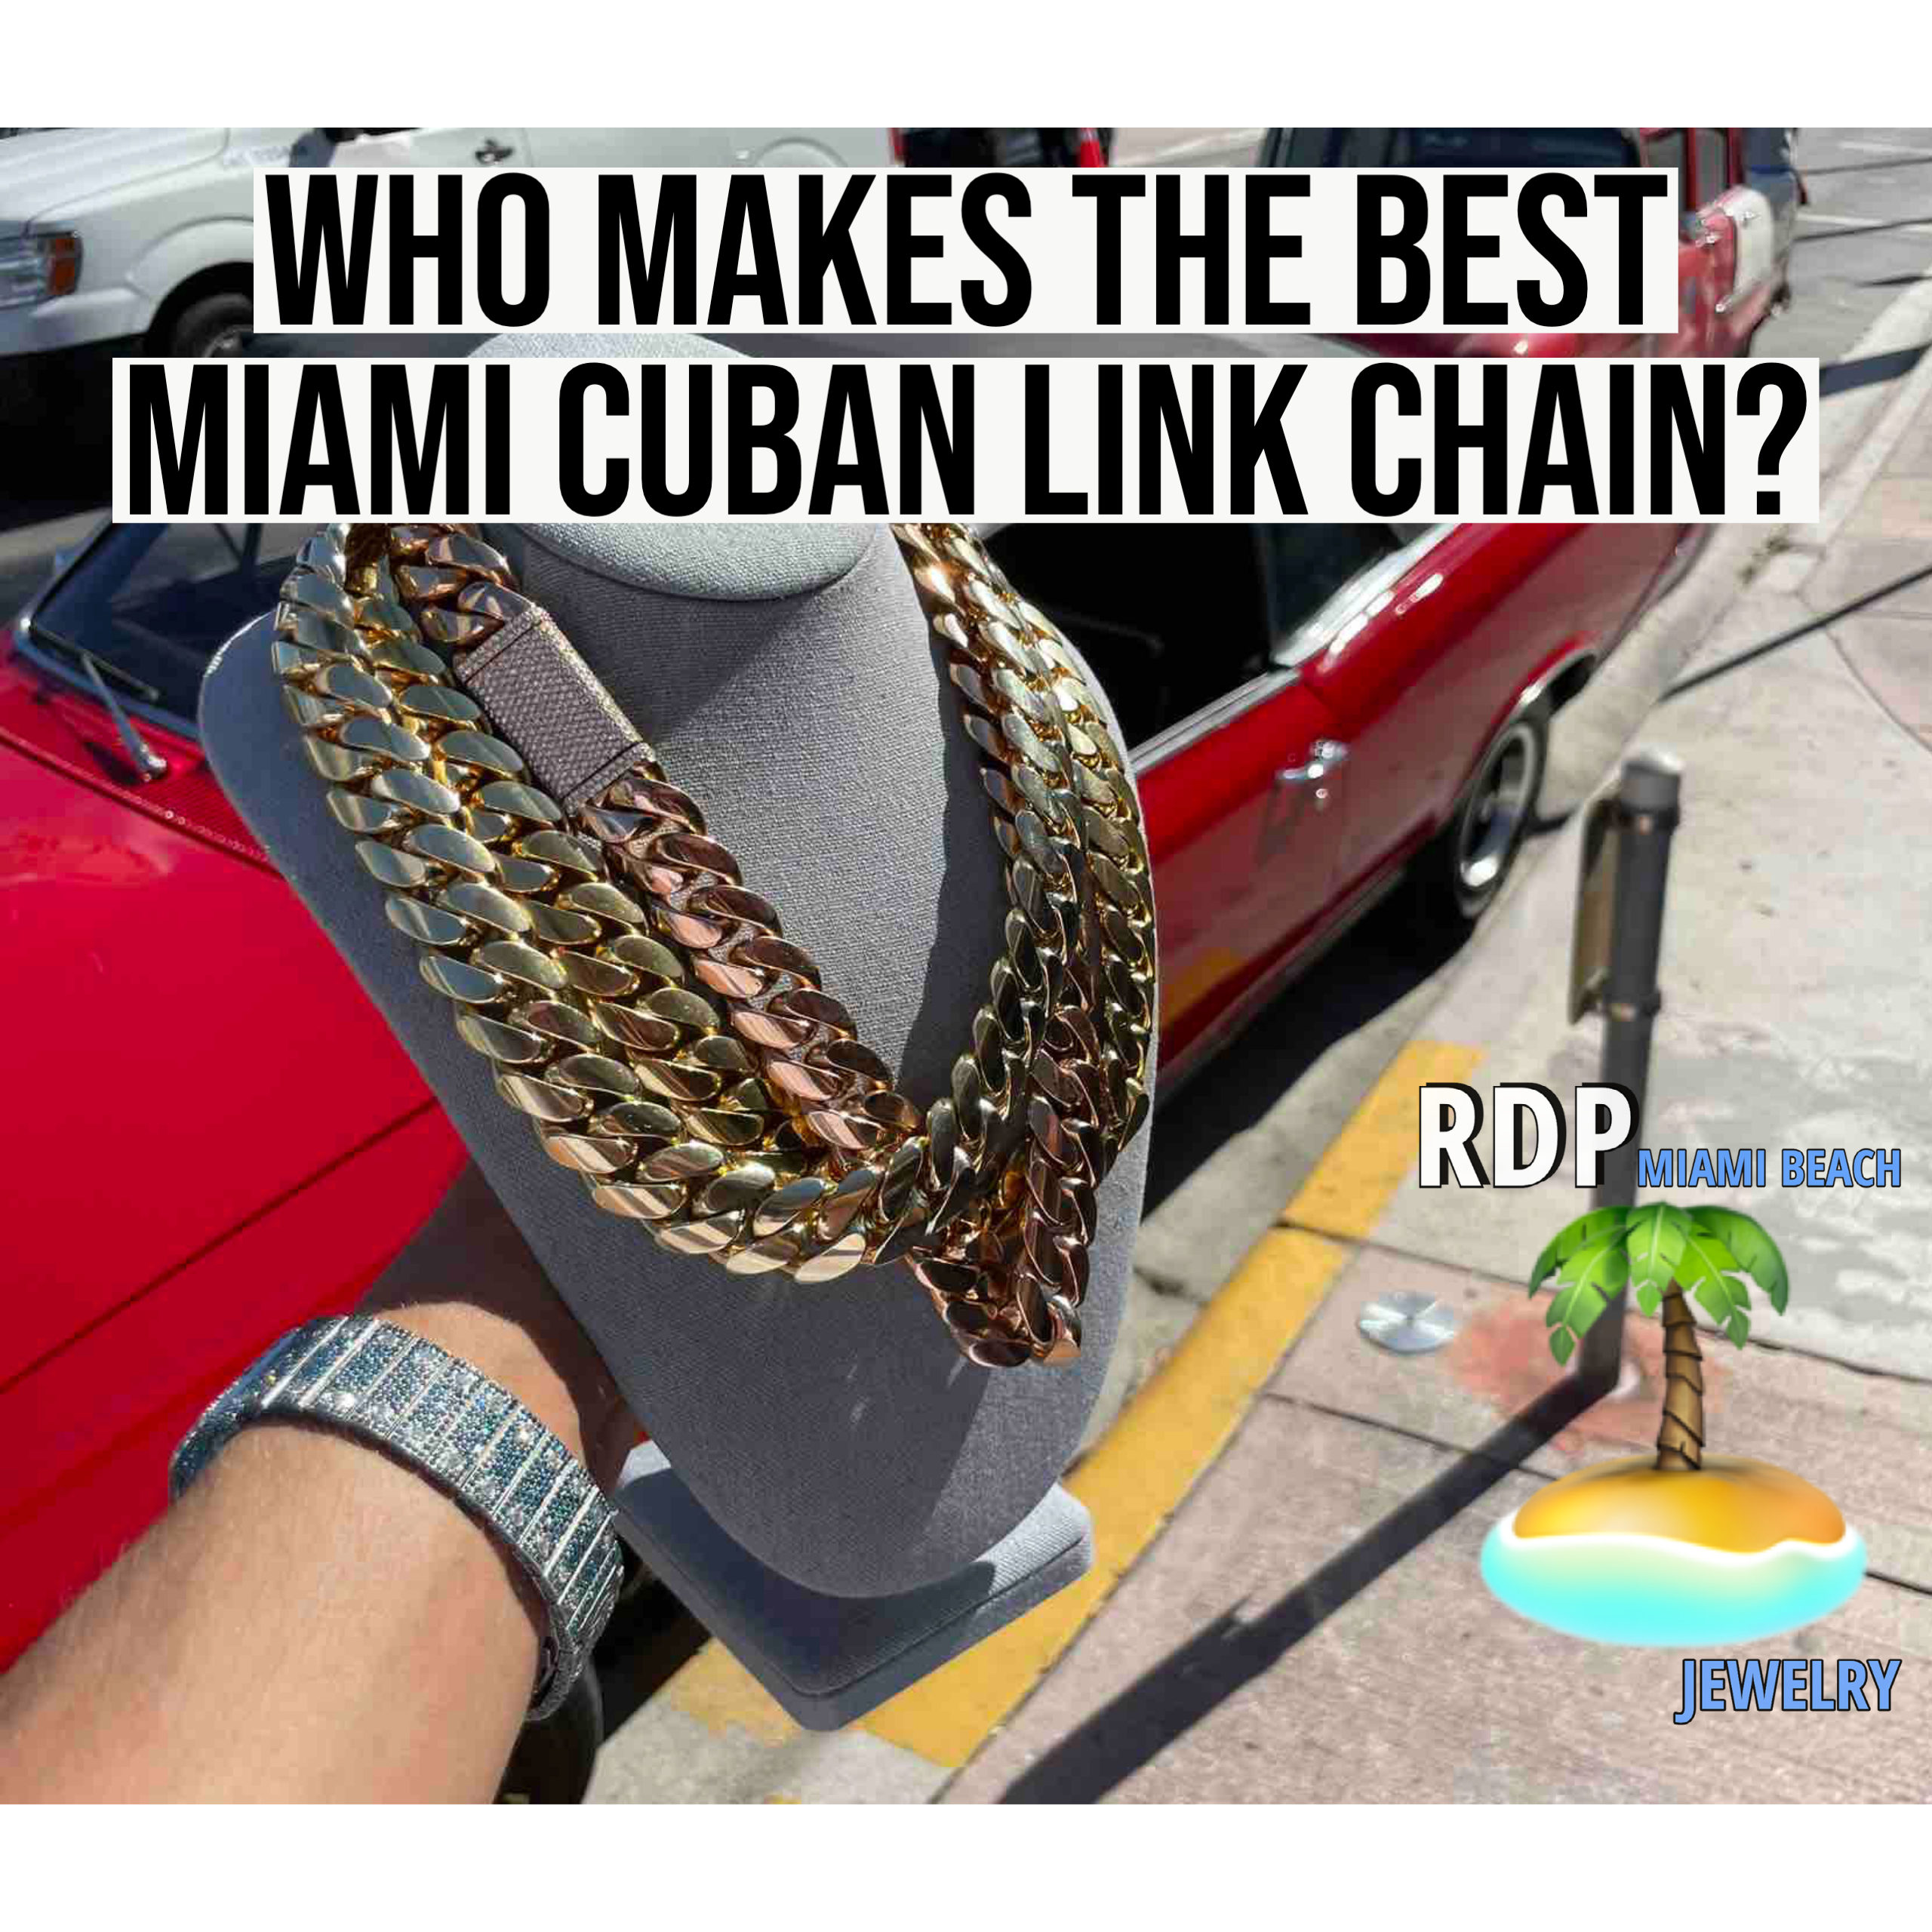 who makes the best miami cuban link chain